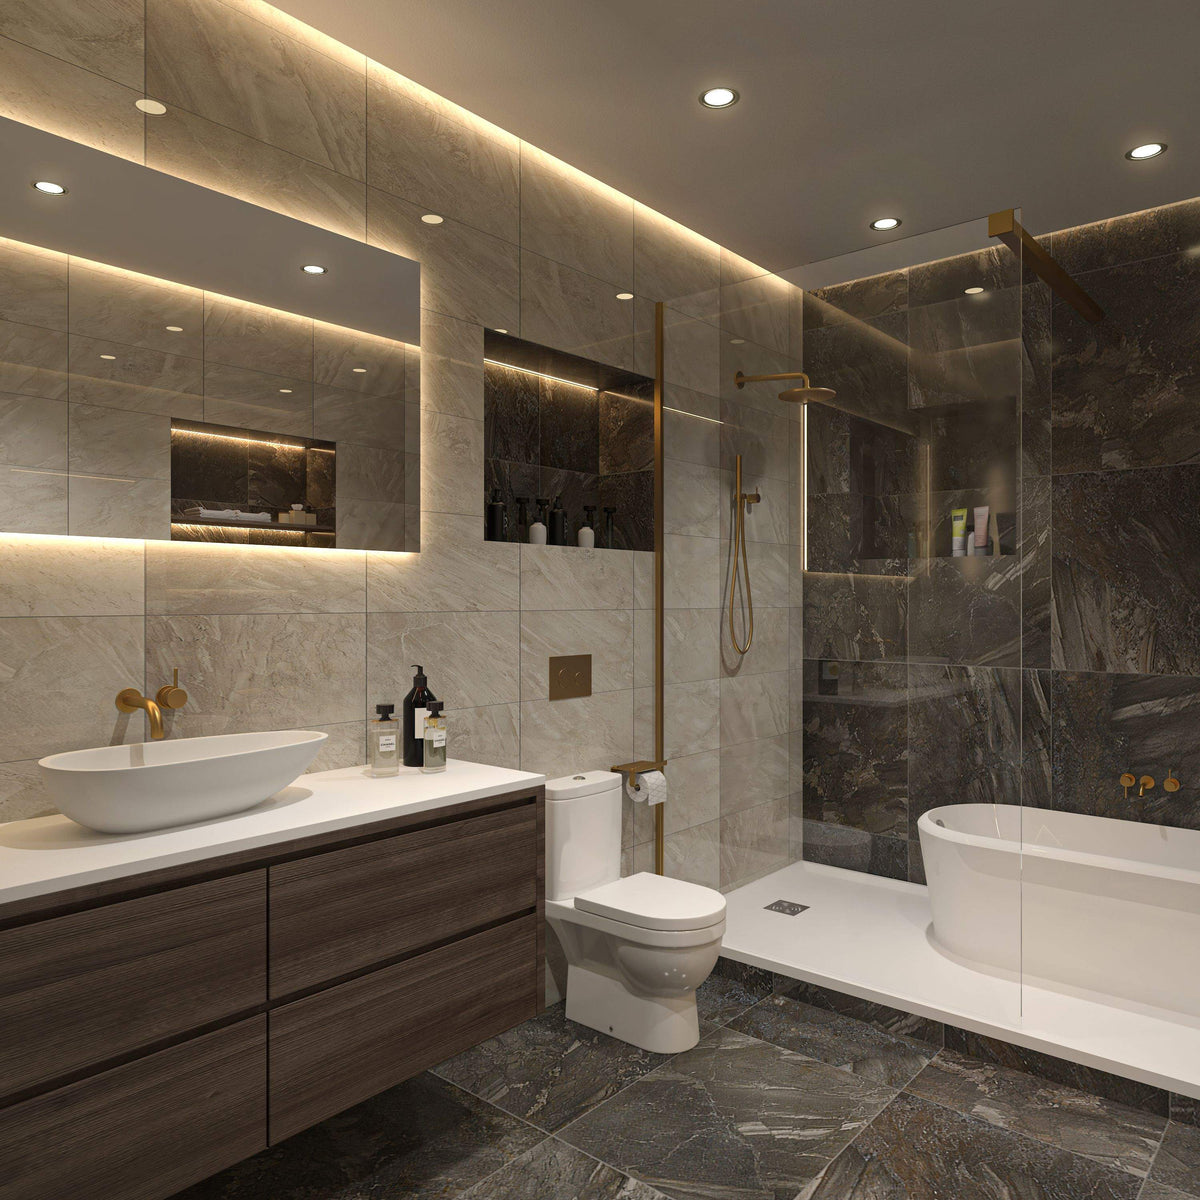 Natural white LED strip lighting example, in a bathroom setting.